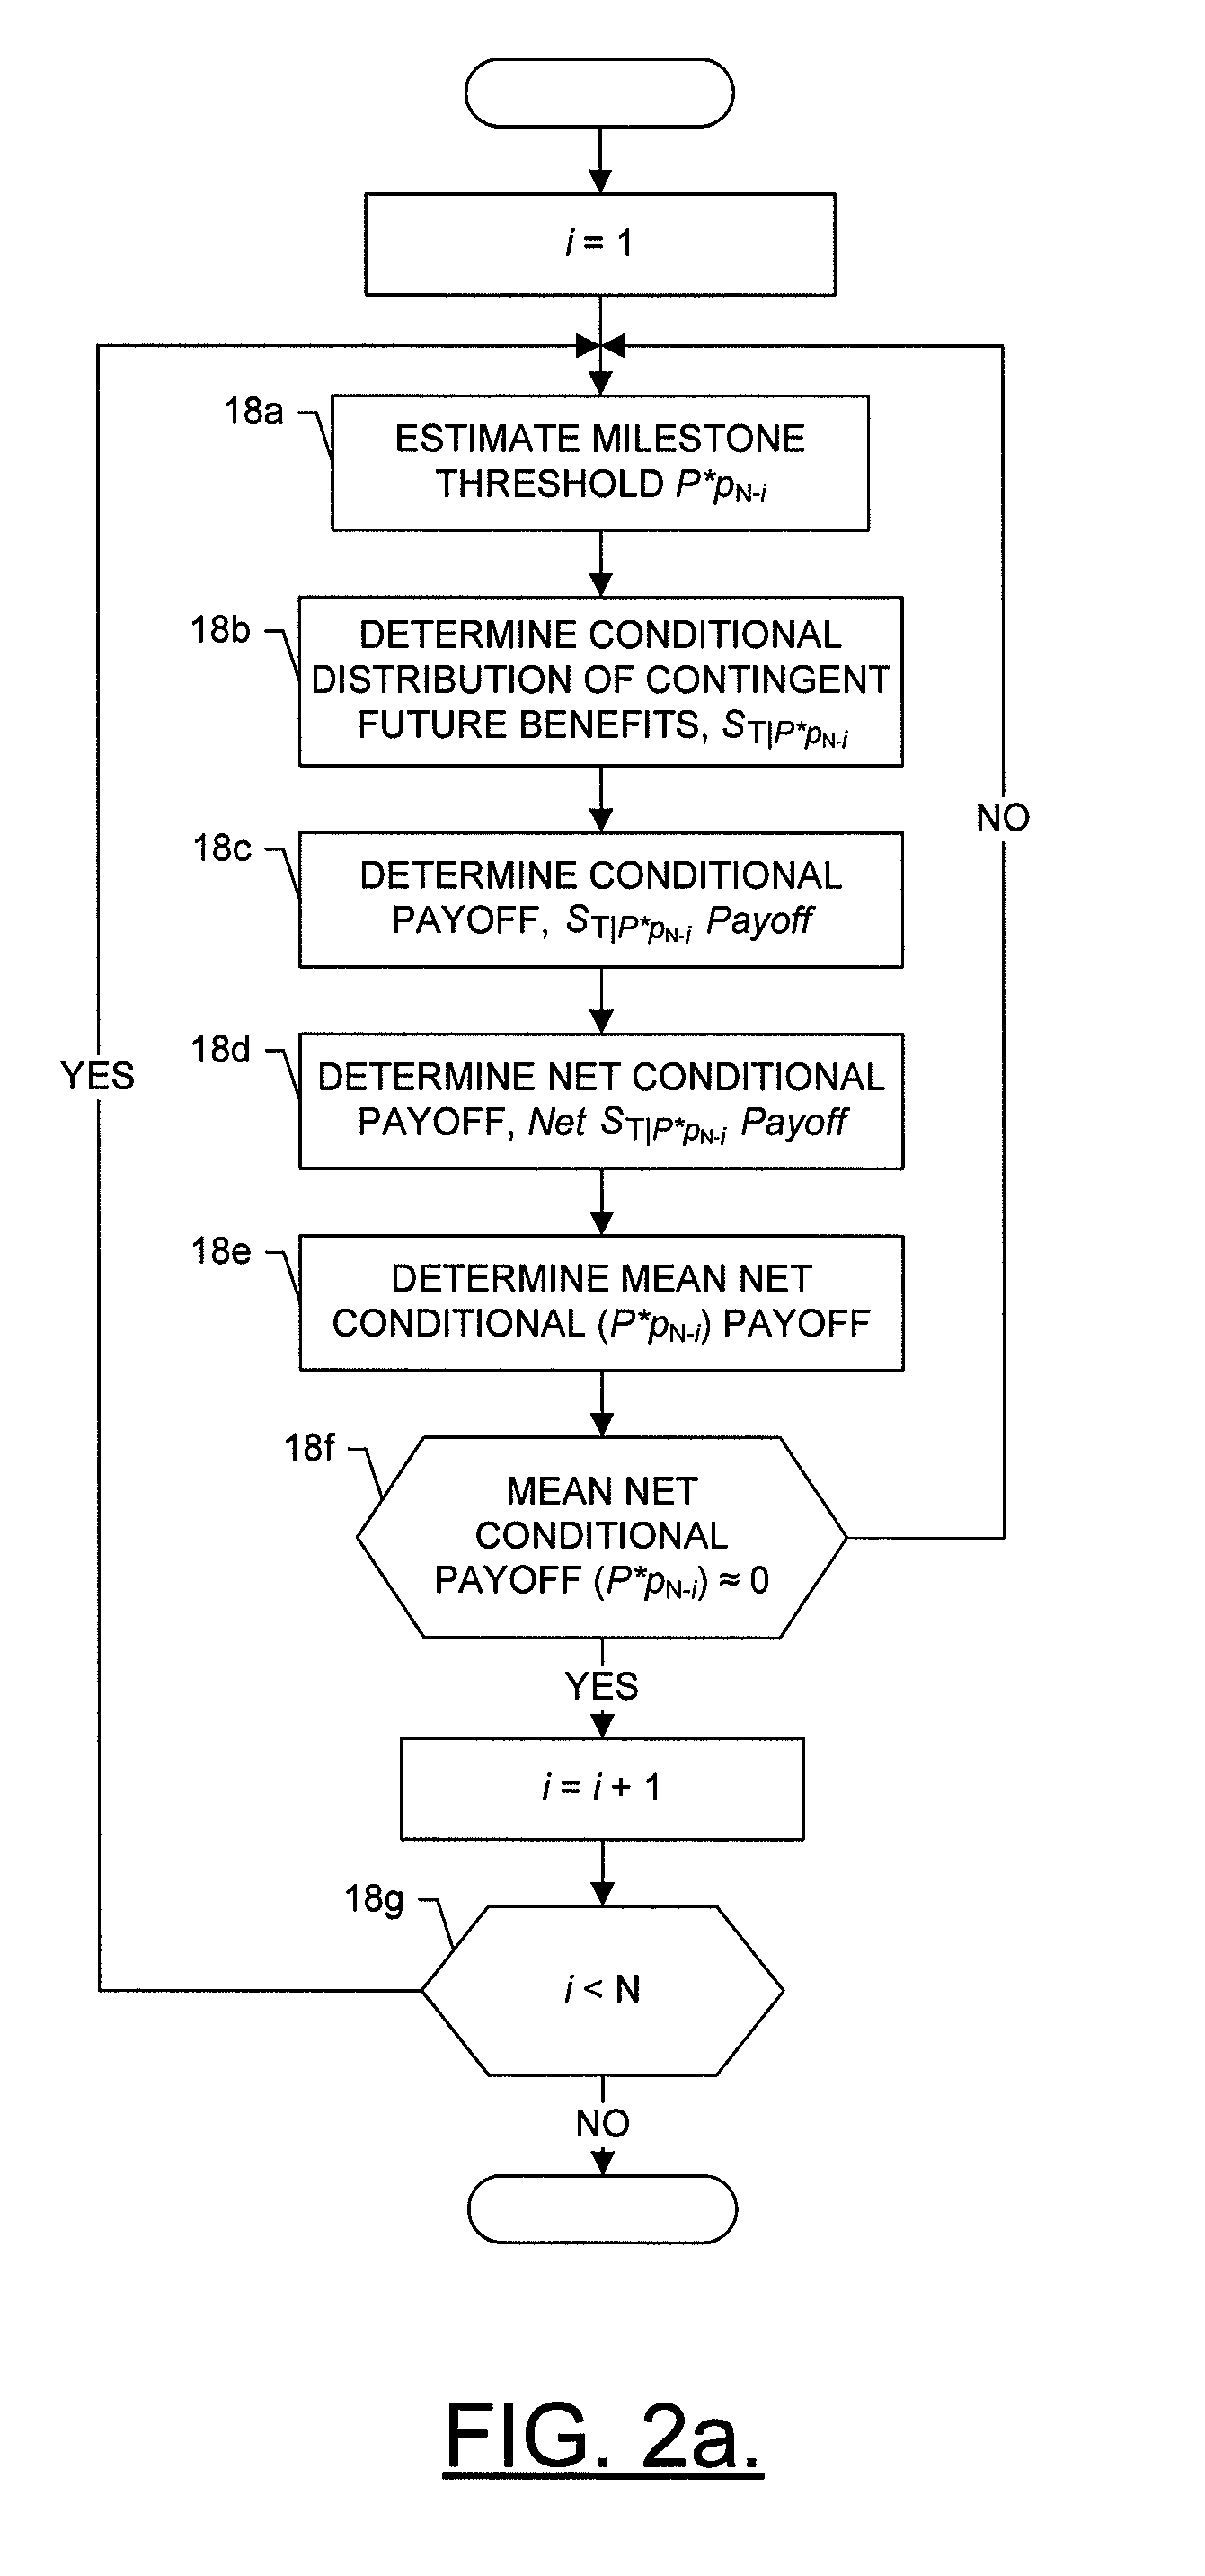 System, method and computer program product for determining a minimum asset value for exercising a contingent claim of an option